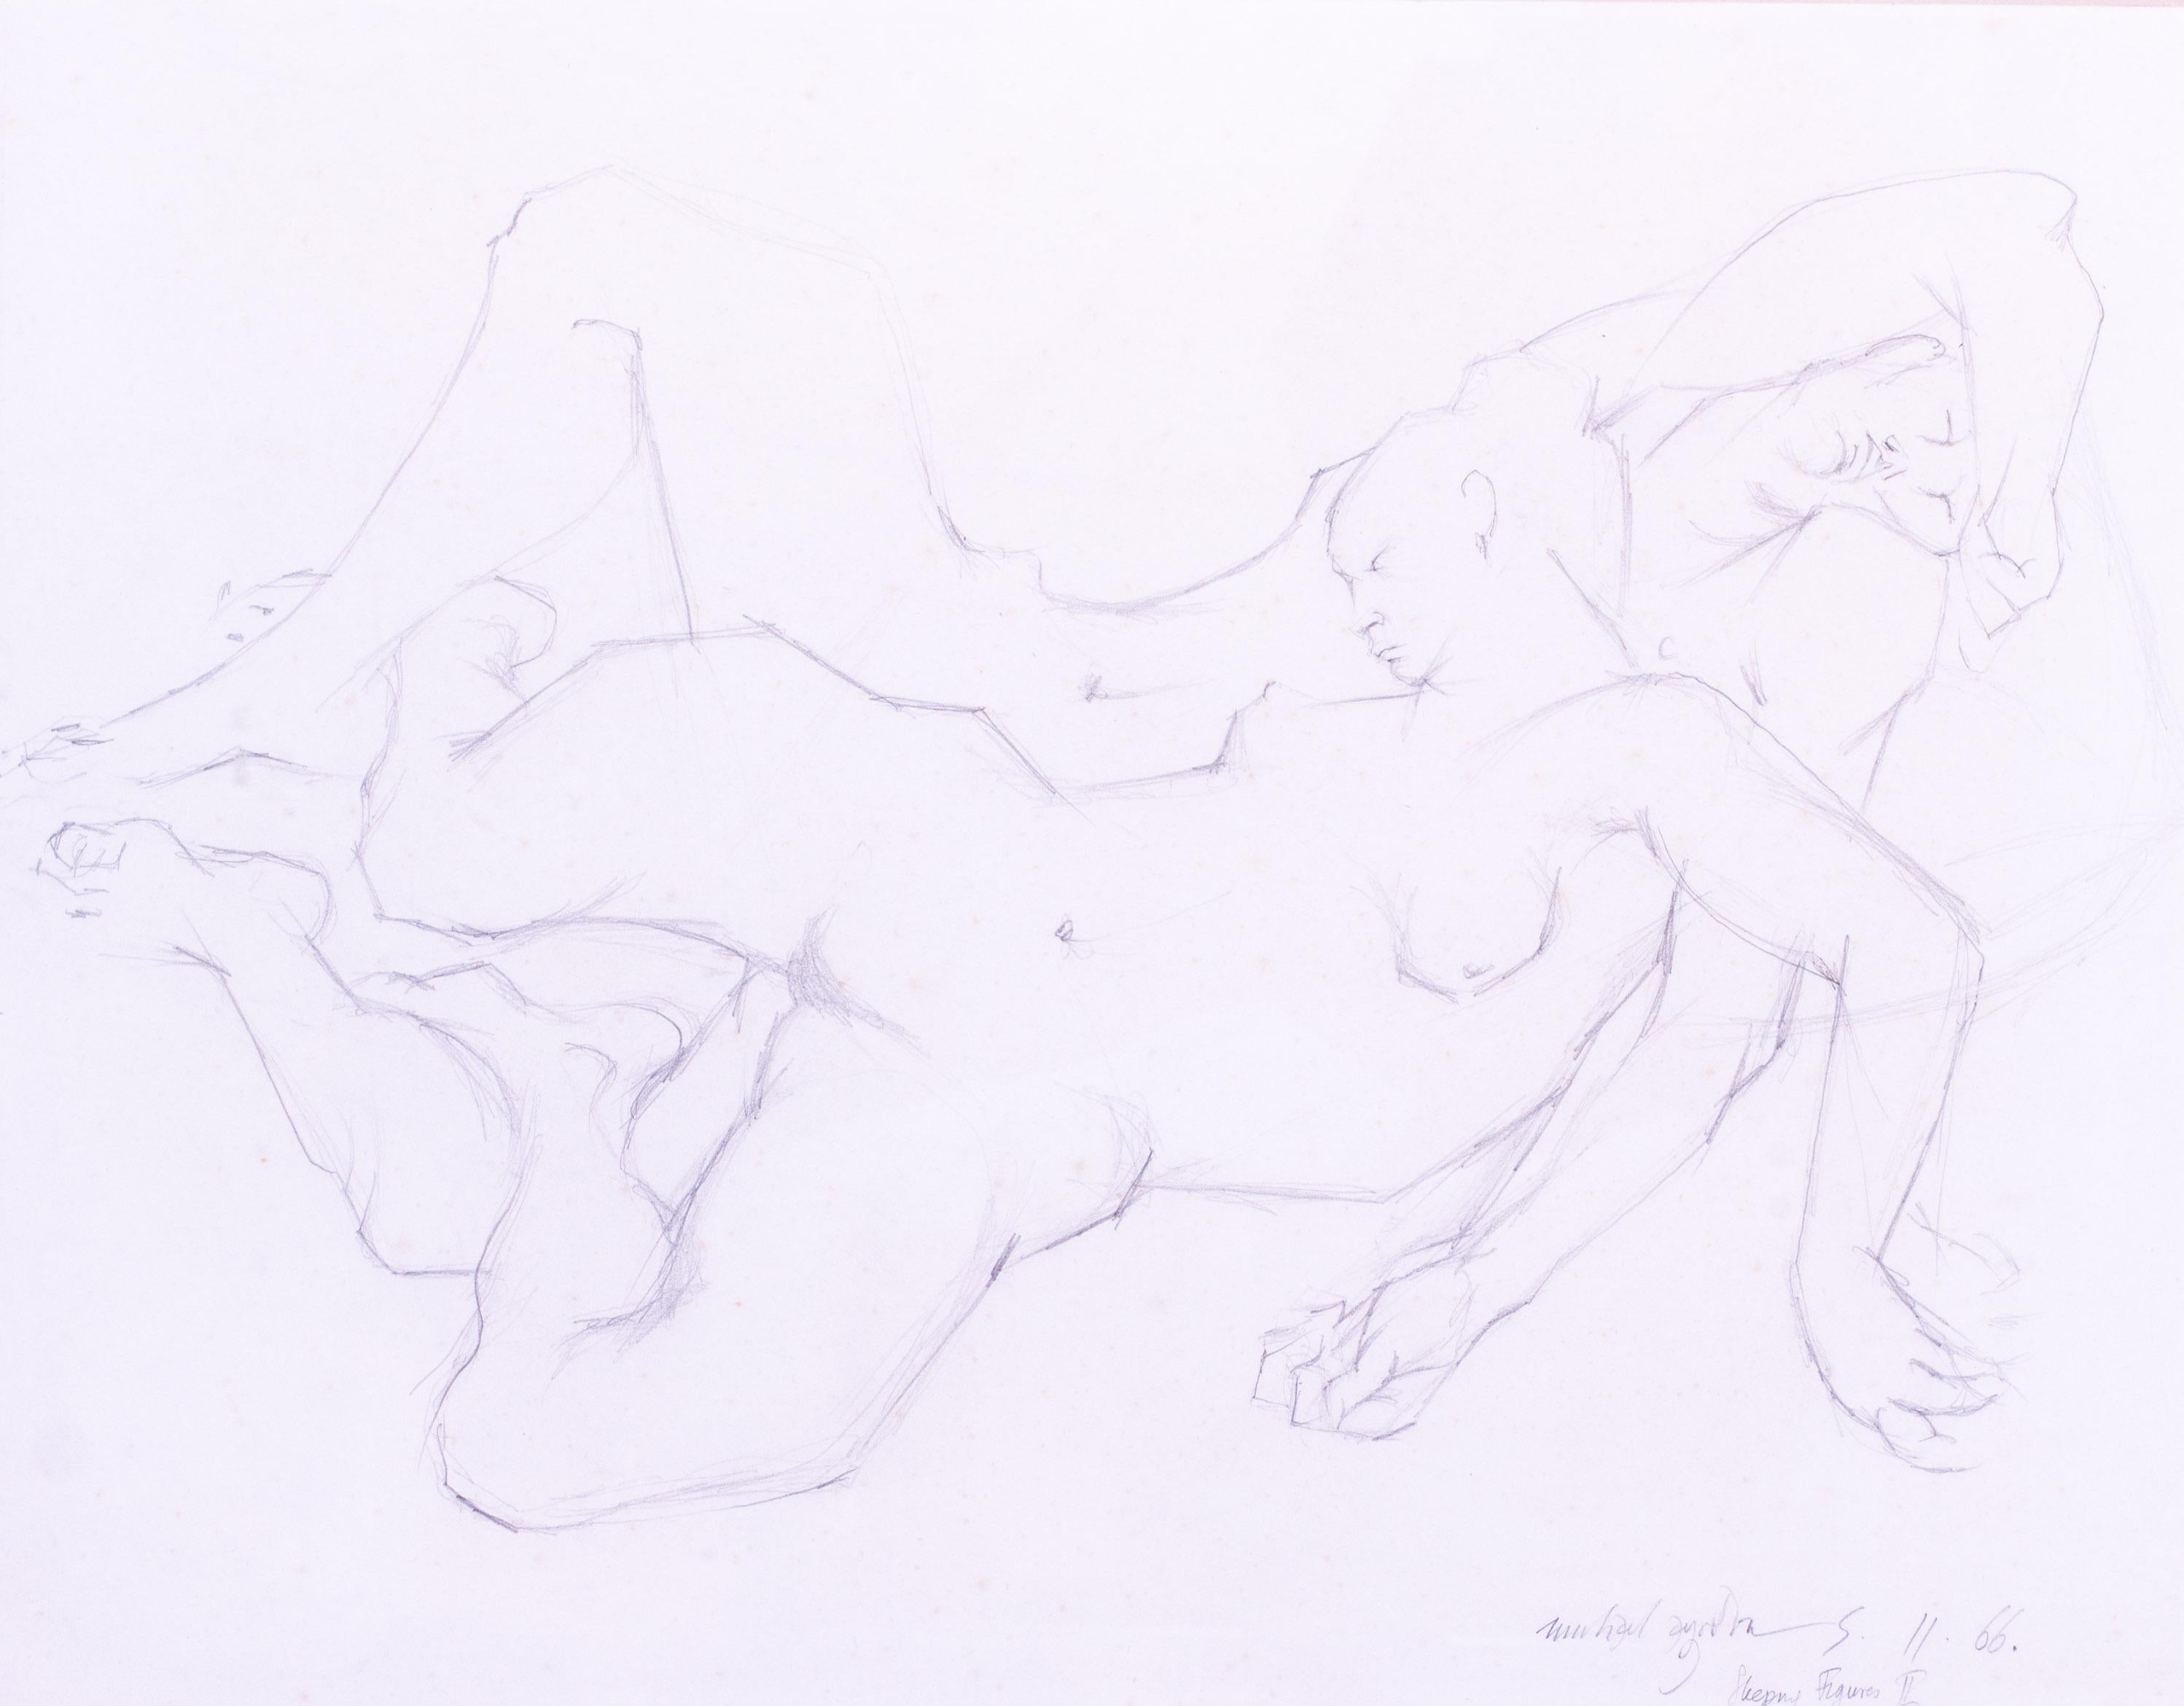 British drawing of nude sleeping figures entwined by 20th Century artist Ayrton - Art by Michael Ayrton